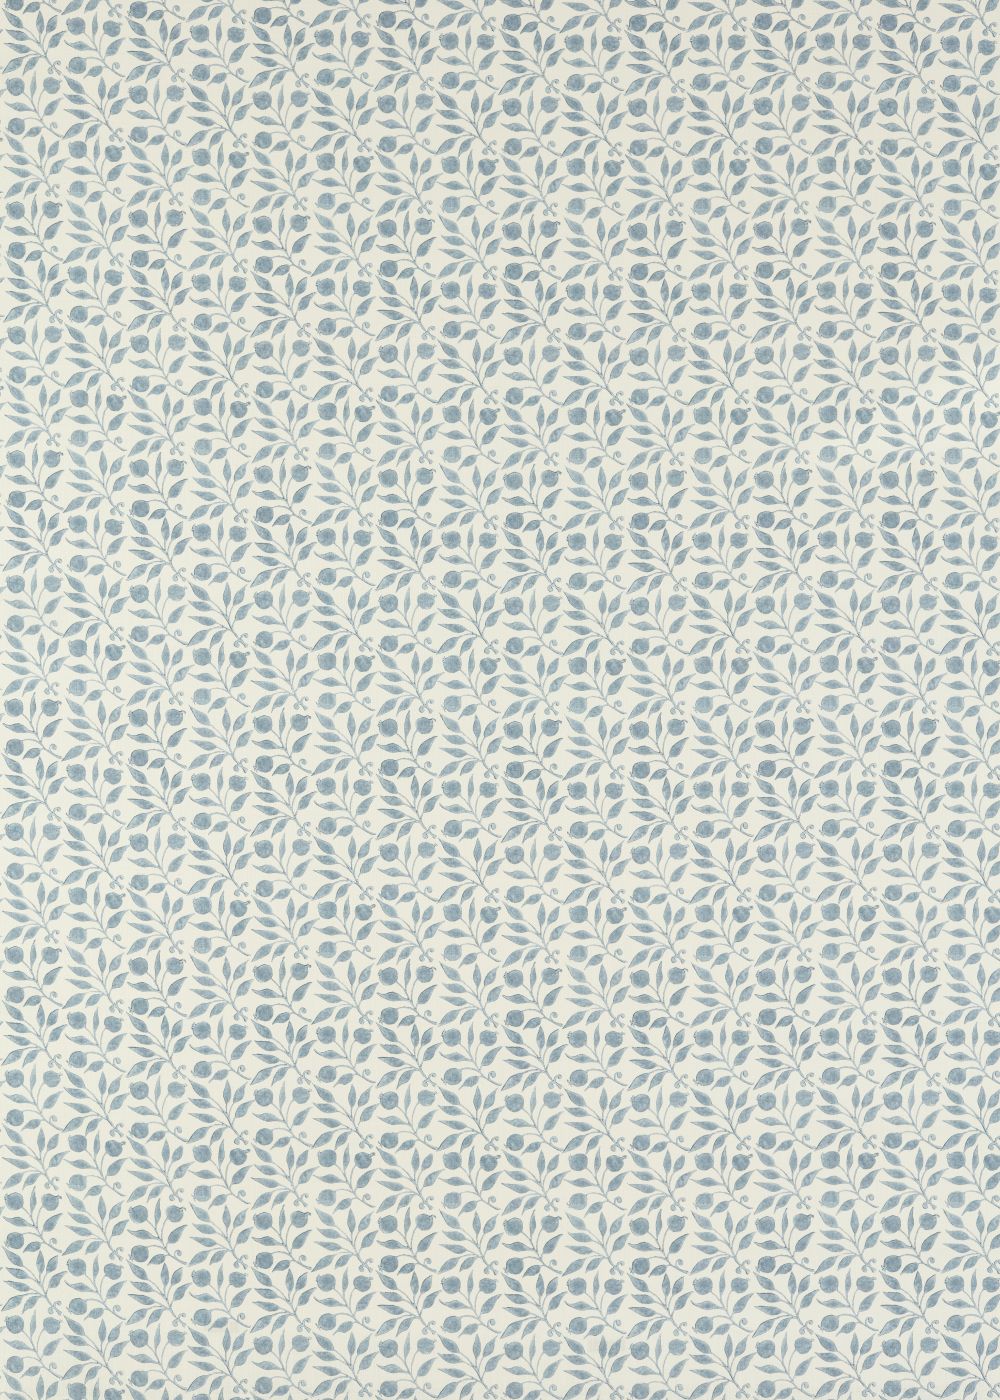 Rosehip Fabric - Mineral Blue - by Morris